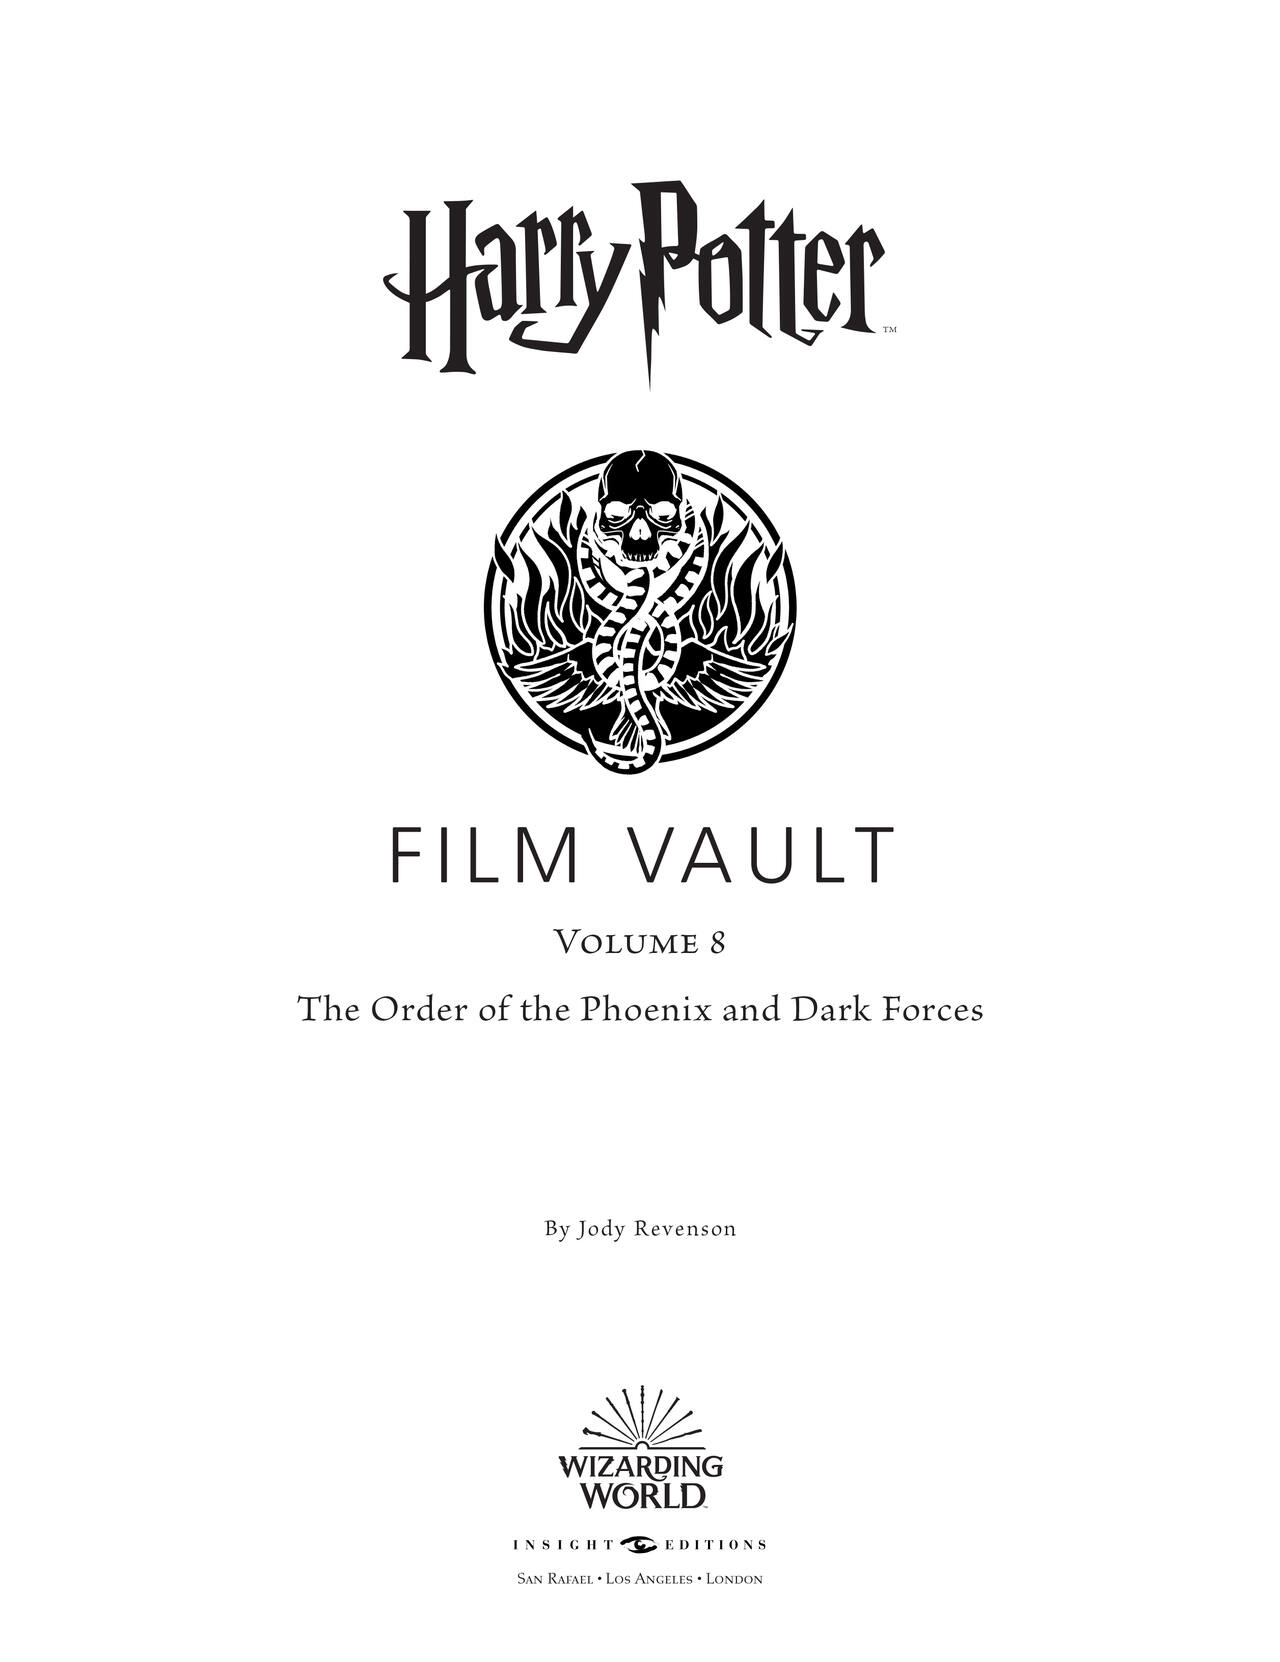 Harry Potter - Film Vault v08 - The Order of the Phoenix and Dark Forces 4